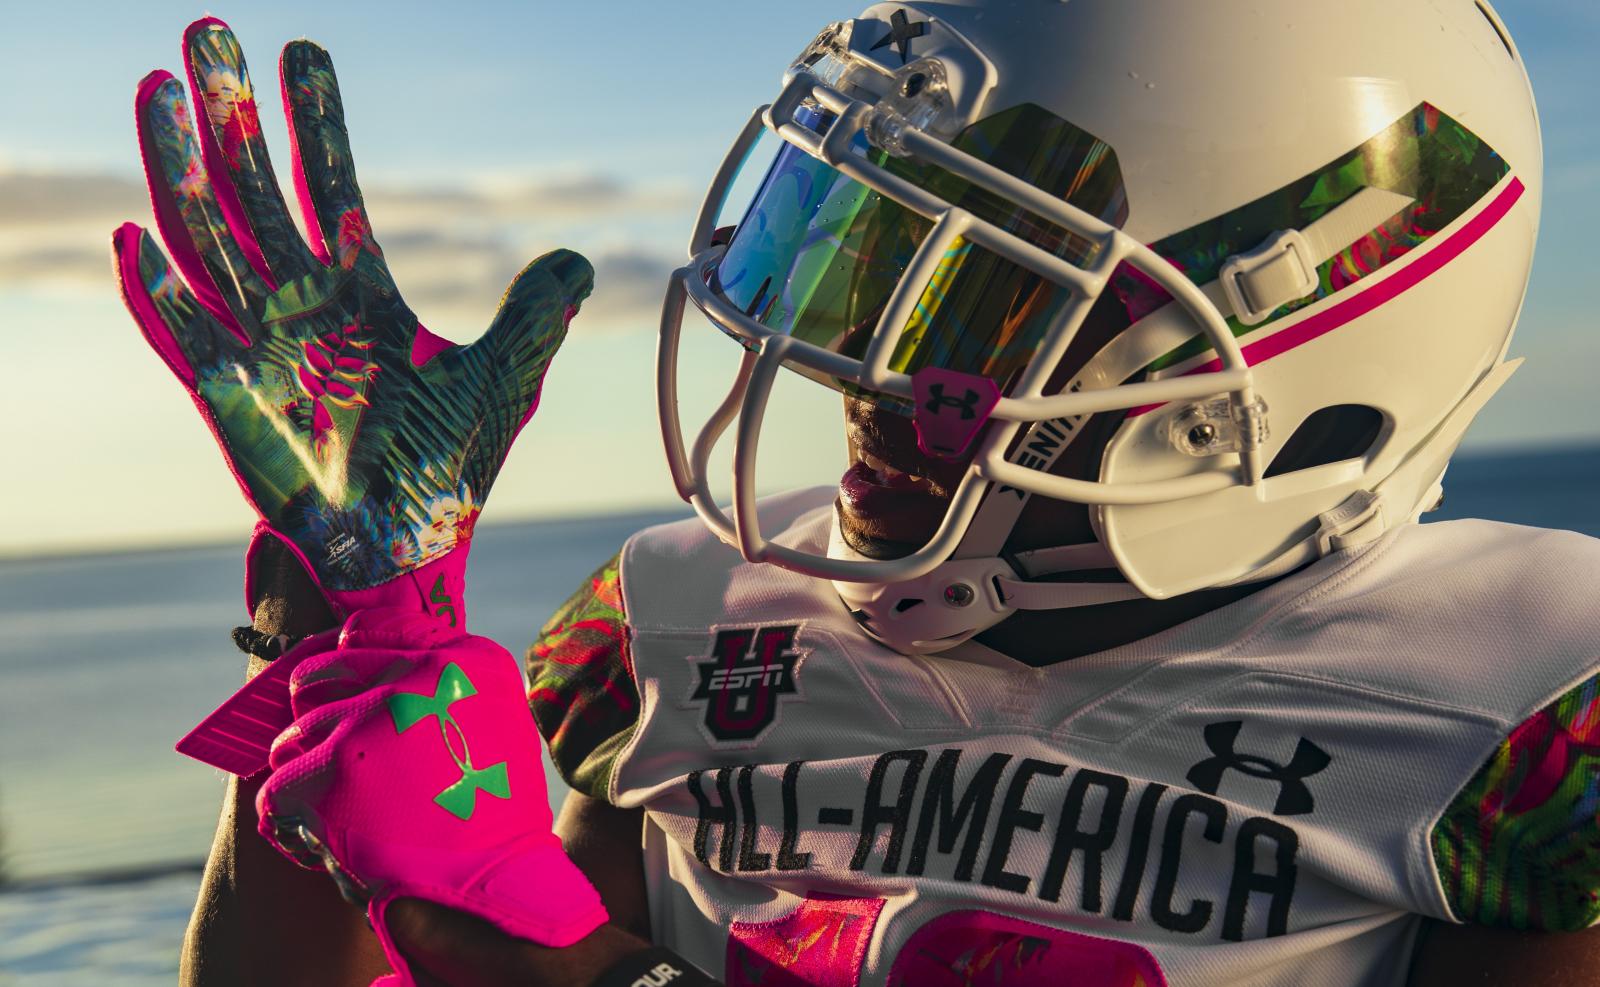 The Custom Ua Uniforms Cleats Helmets And Gloves For The 2019 All America Game Are Absolutely